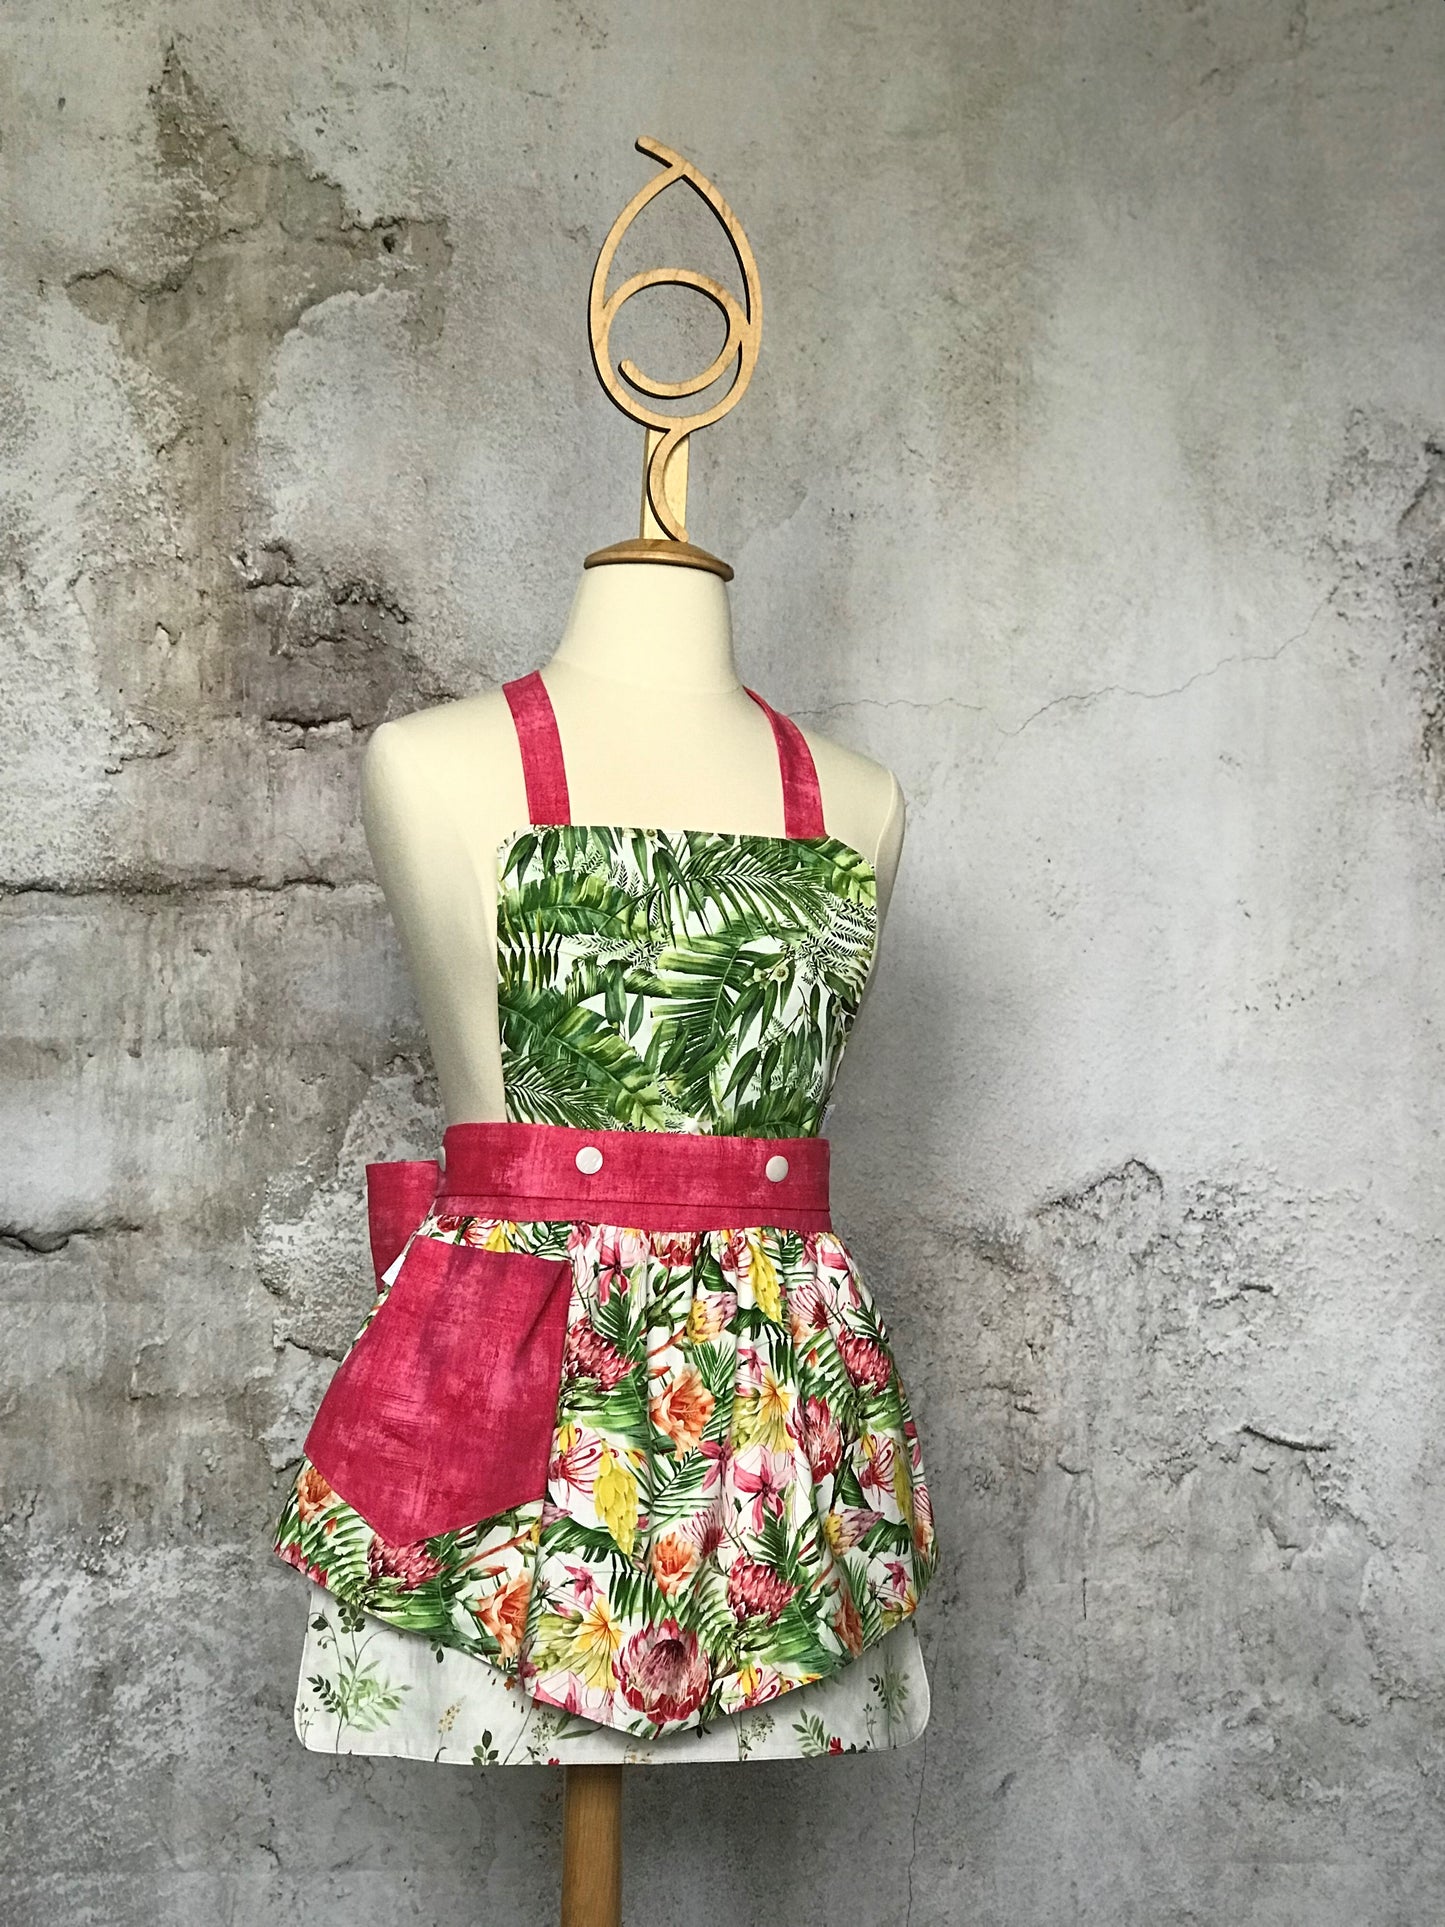 Deby’s Diva Apron™ is a patent pending convertible kitchen apron that can be worn 24 different ways by using the buttons on the waistband to flip, add or subtract the bib and both apron front and back. Featuring generously sized pockets, 100% high quality cotton fabric, and long waist and neck ties to make this apron well suited for most figures. Brightly colored flowers, palm leaves and stripes make this apron a happy burst of sunshine.